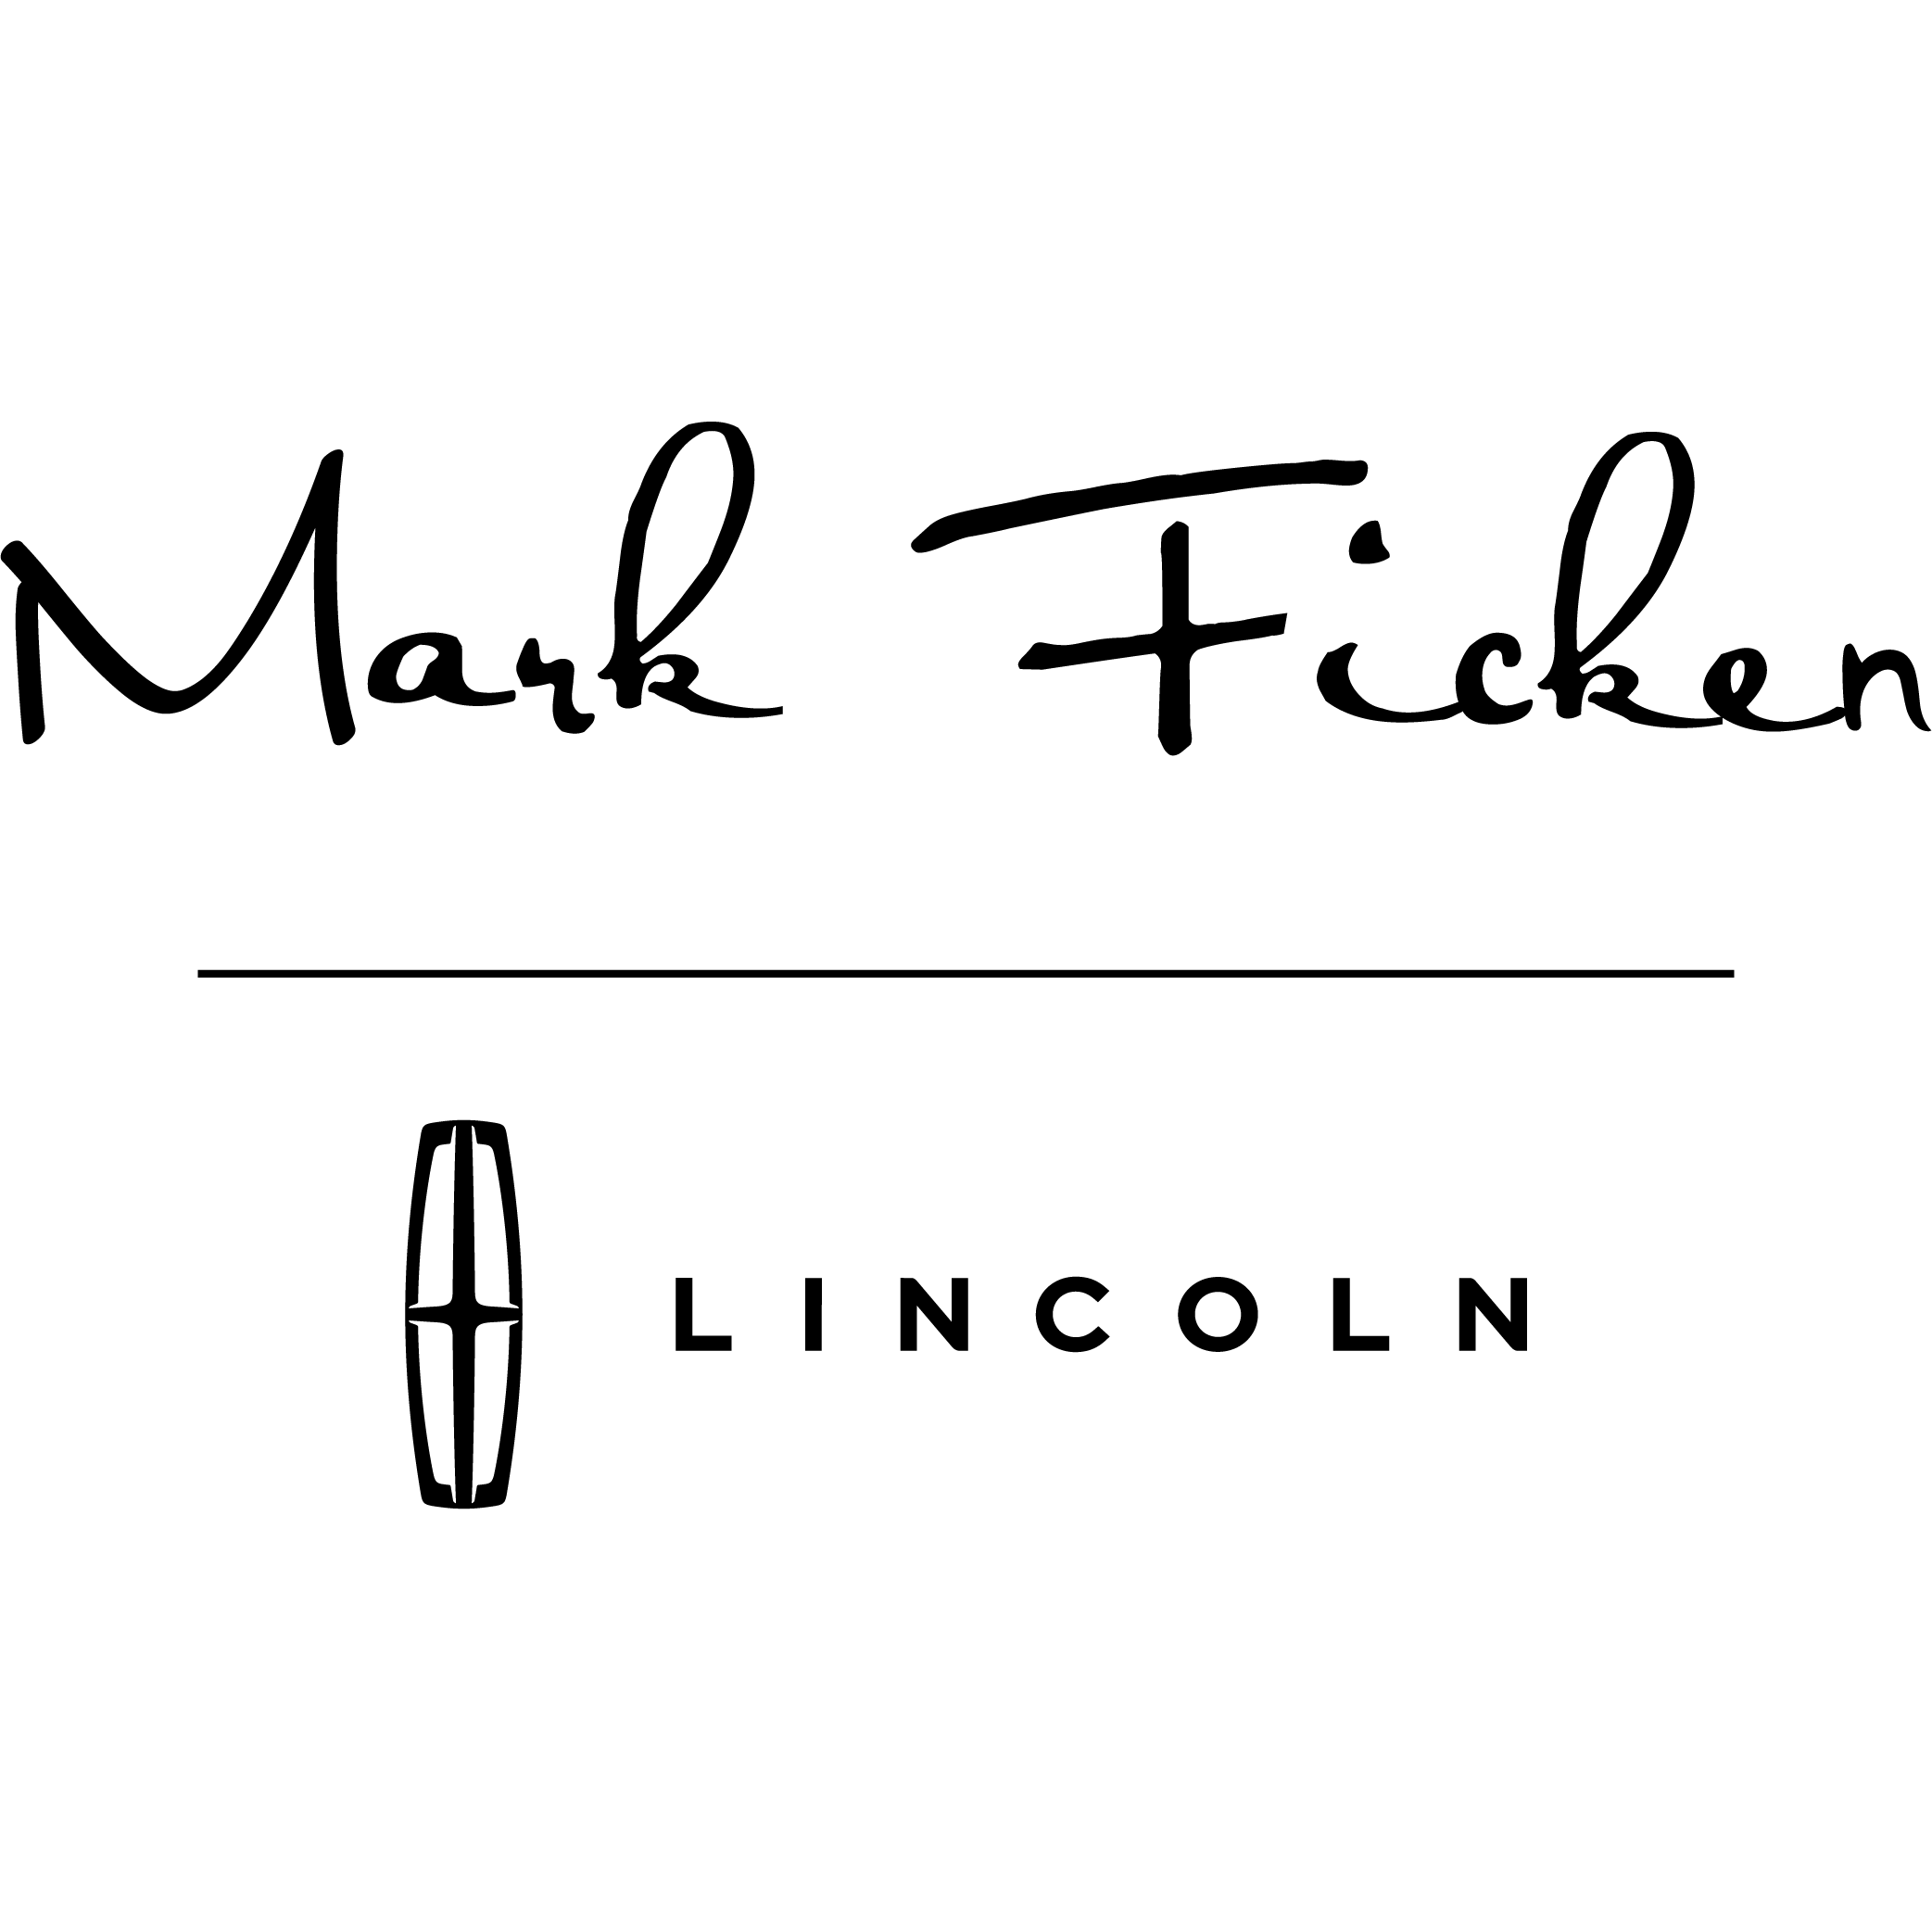 Ficken Lincoln Ford